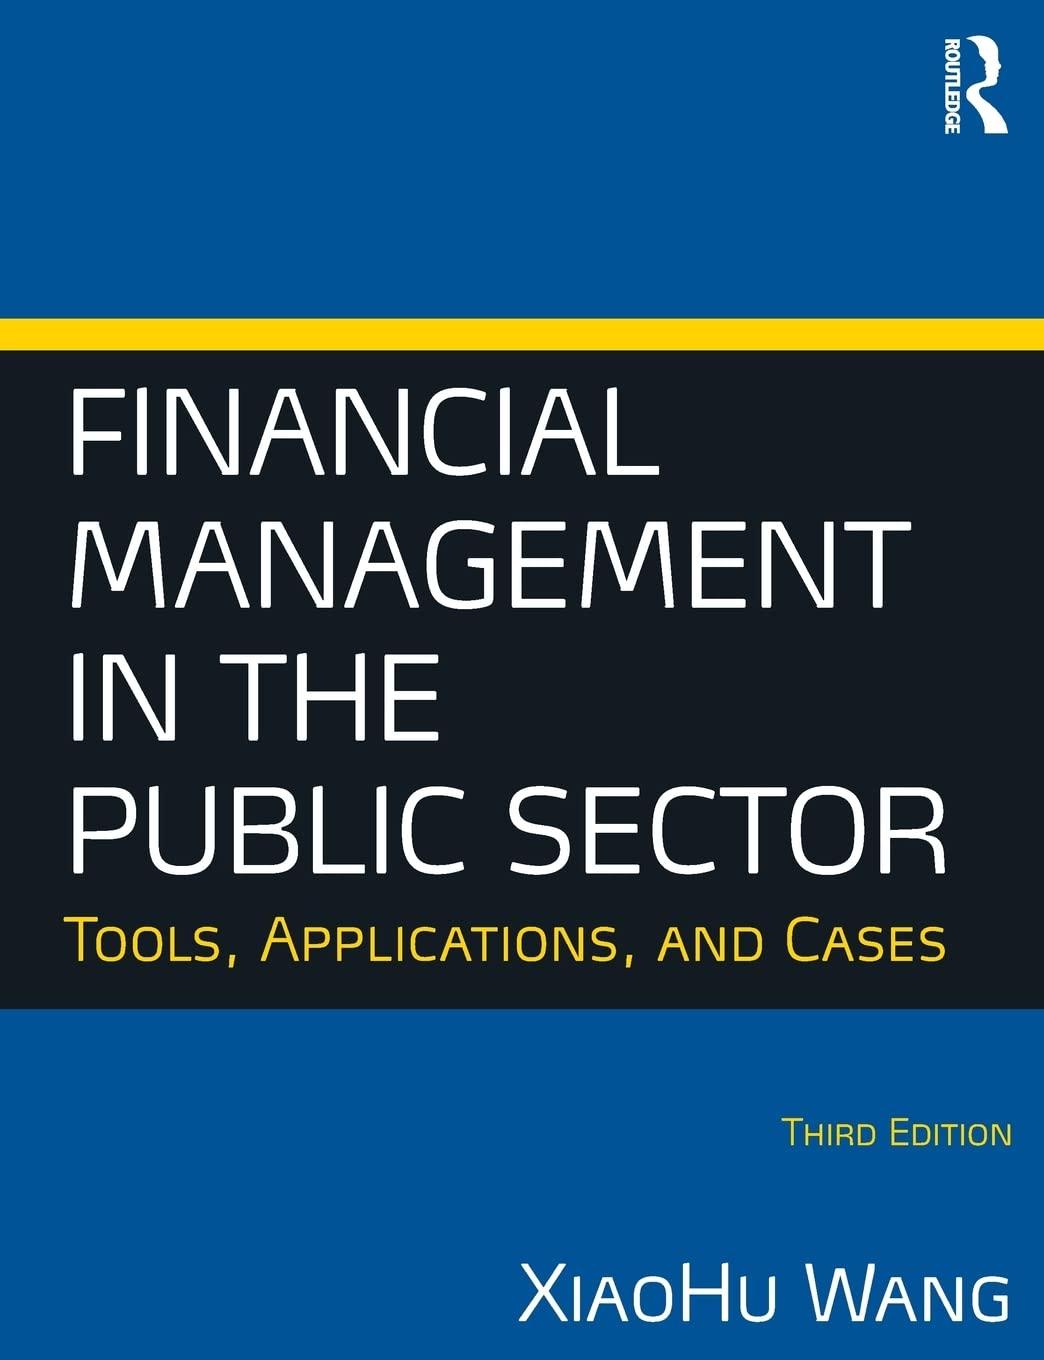 financial management in the public sector tools applications and cases 3rd edition xiaohu wang 0765636891,